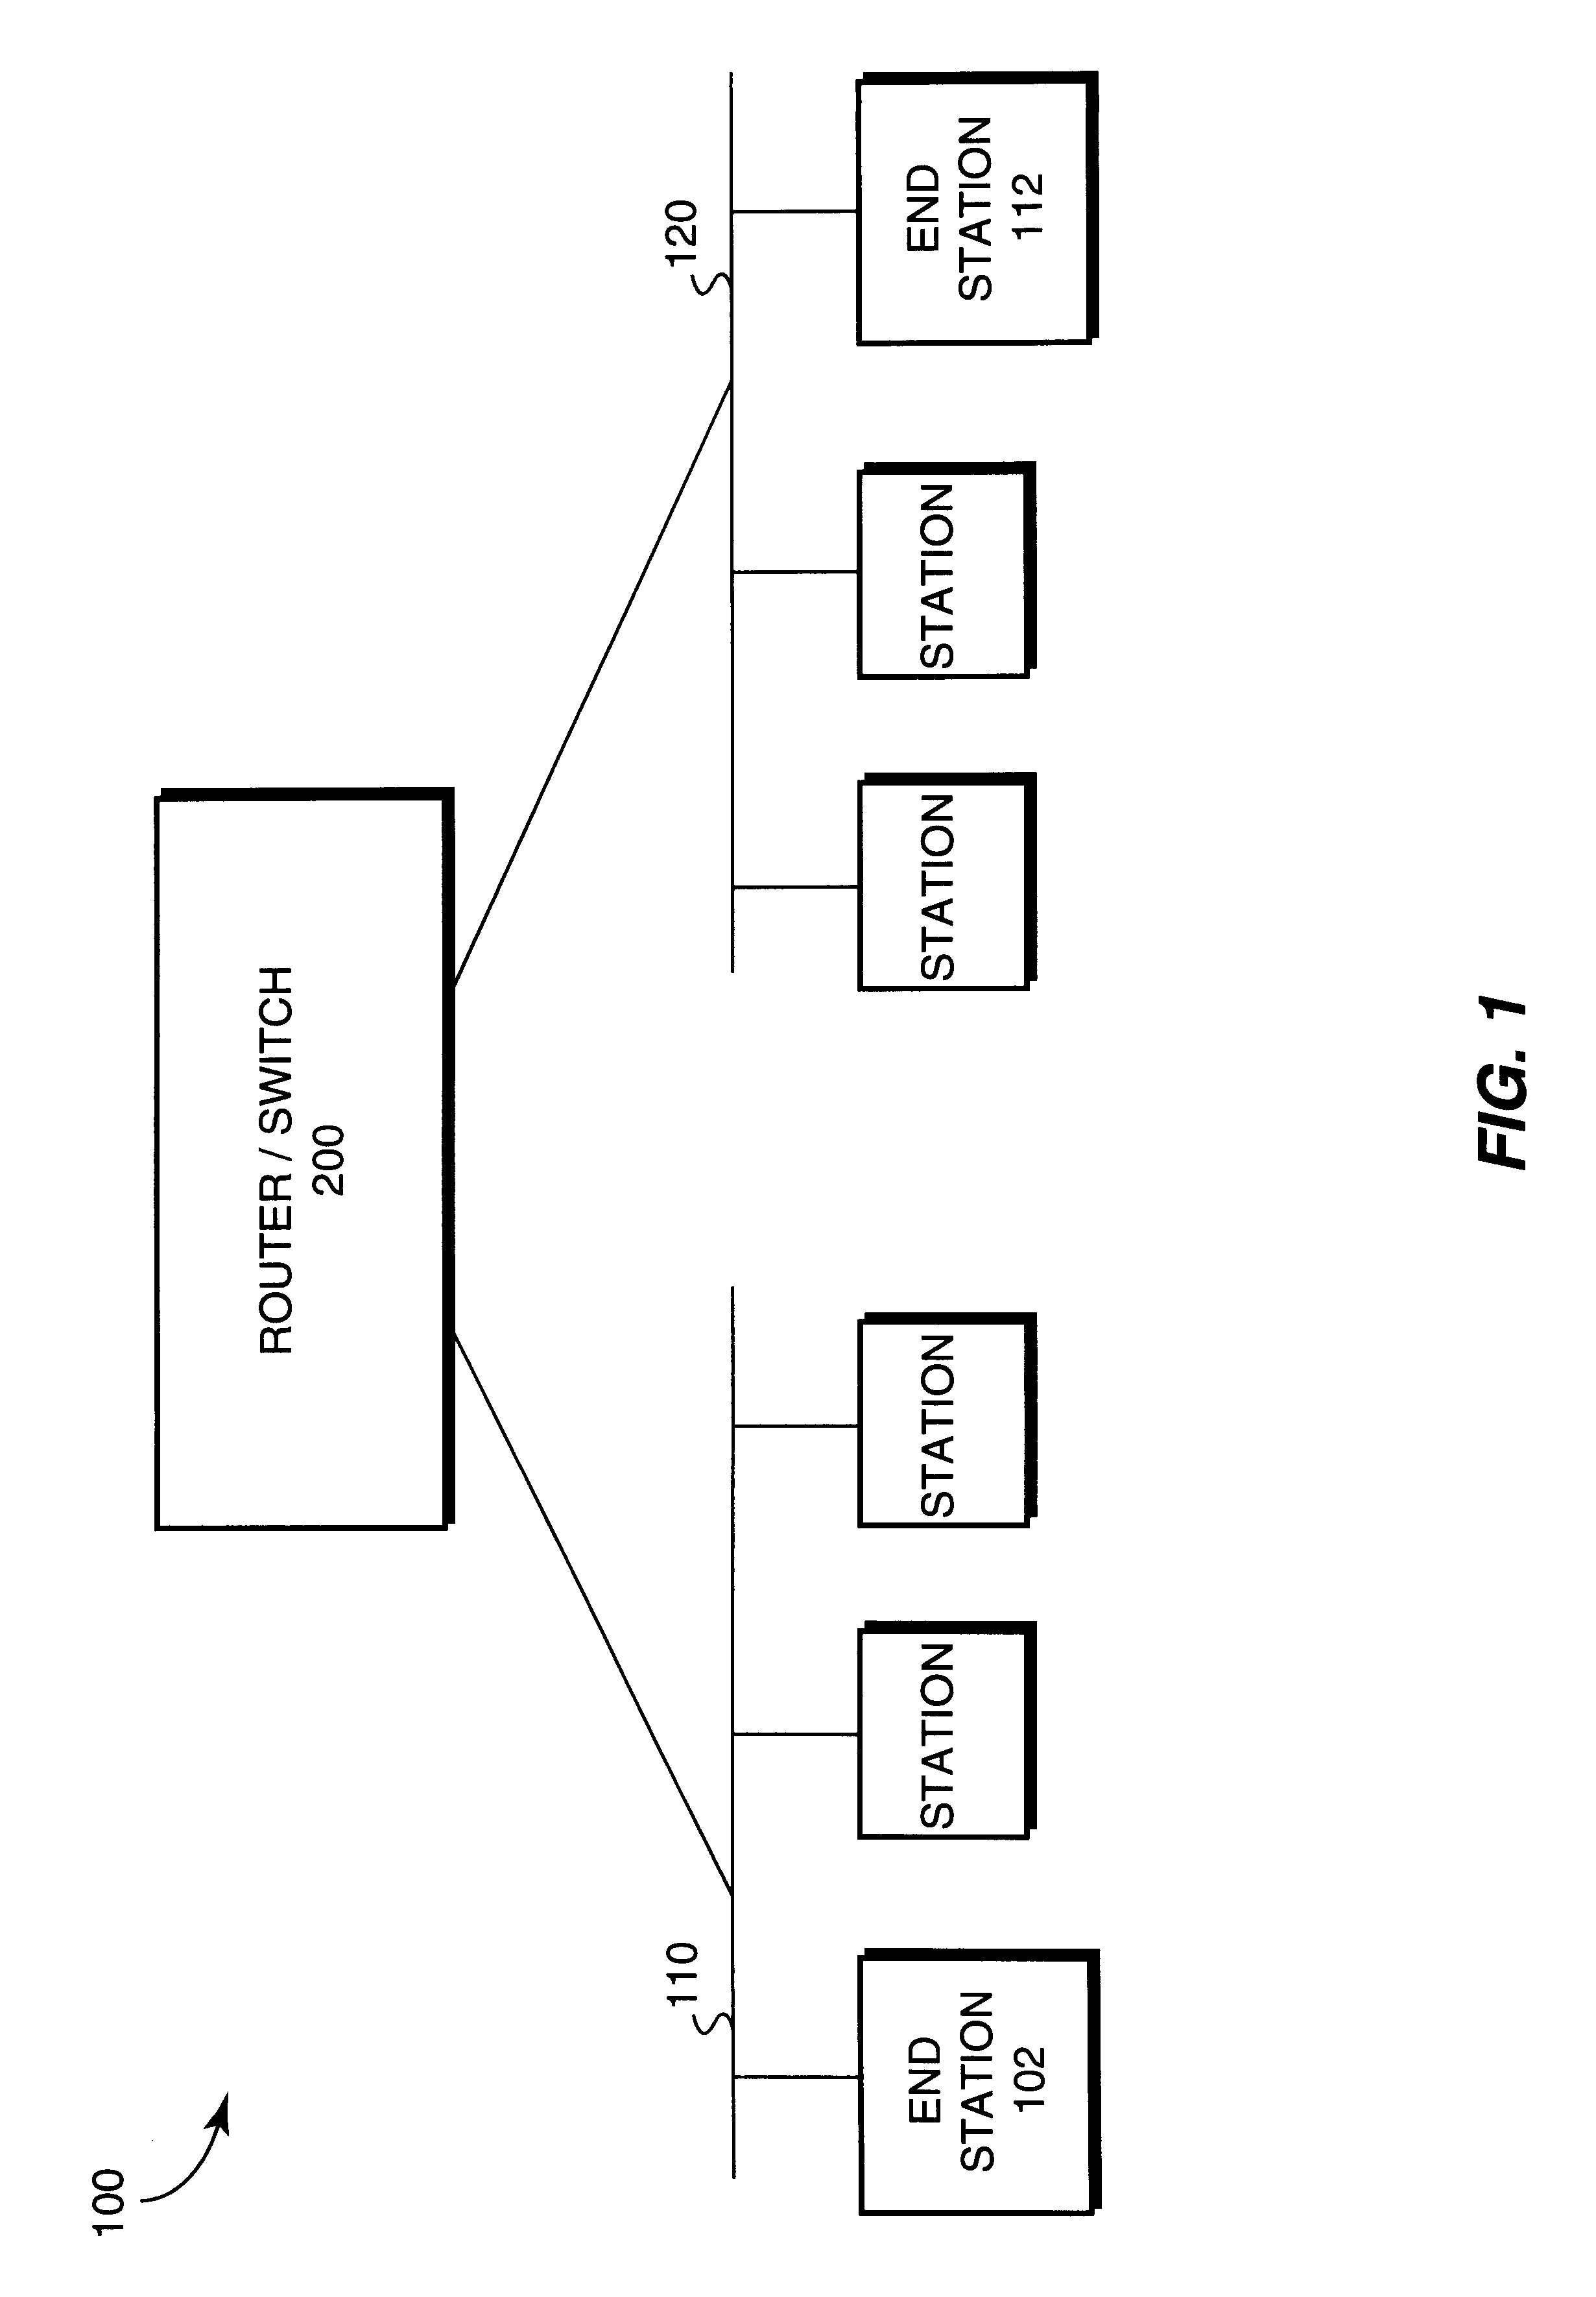 Parallel processor with debug capability